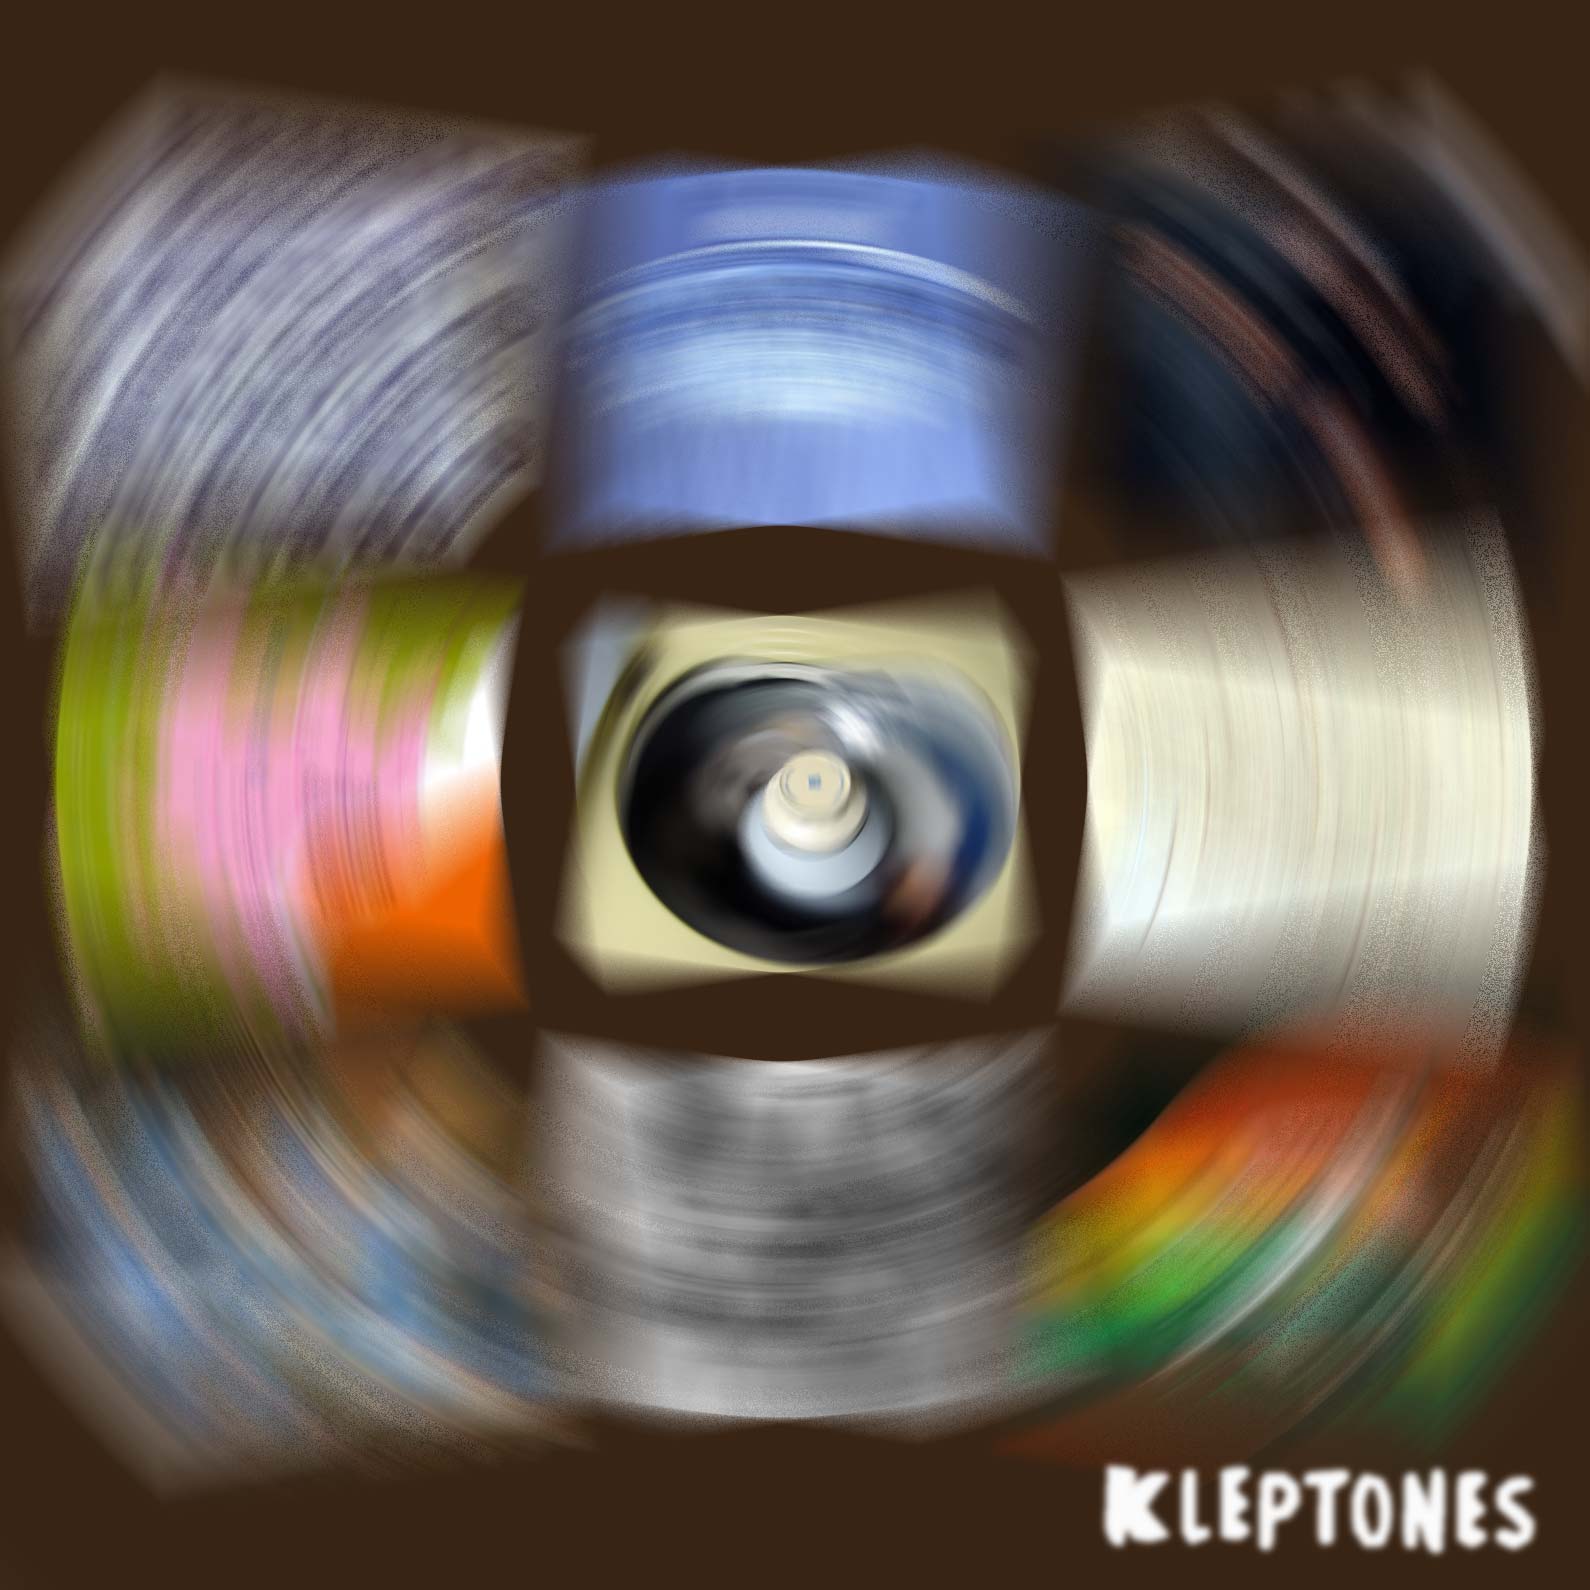 The Kleptones - From Detroit To J.A.